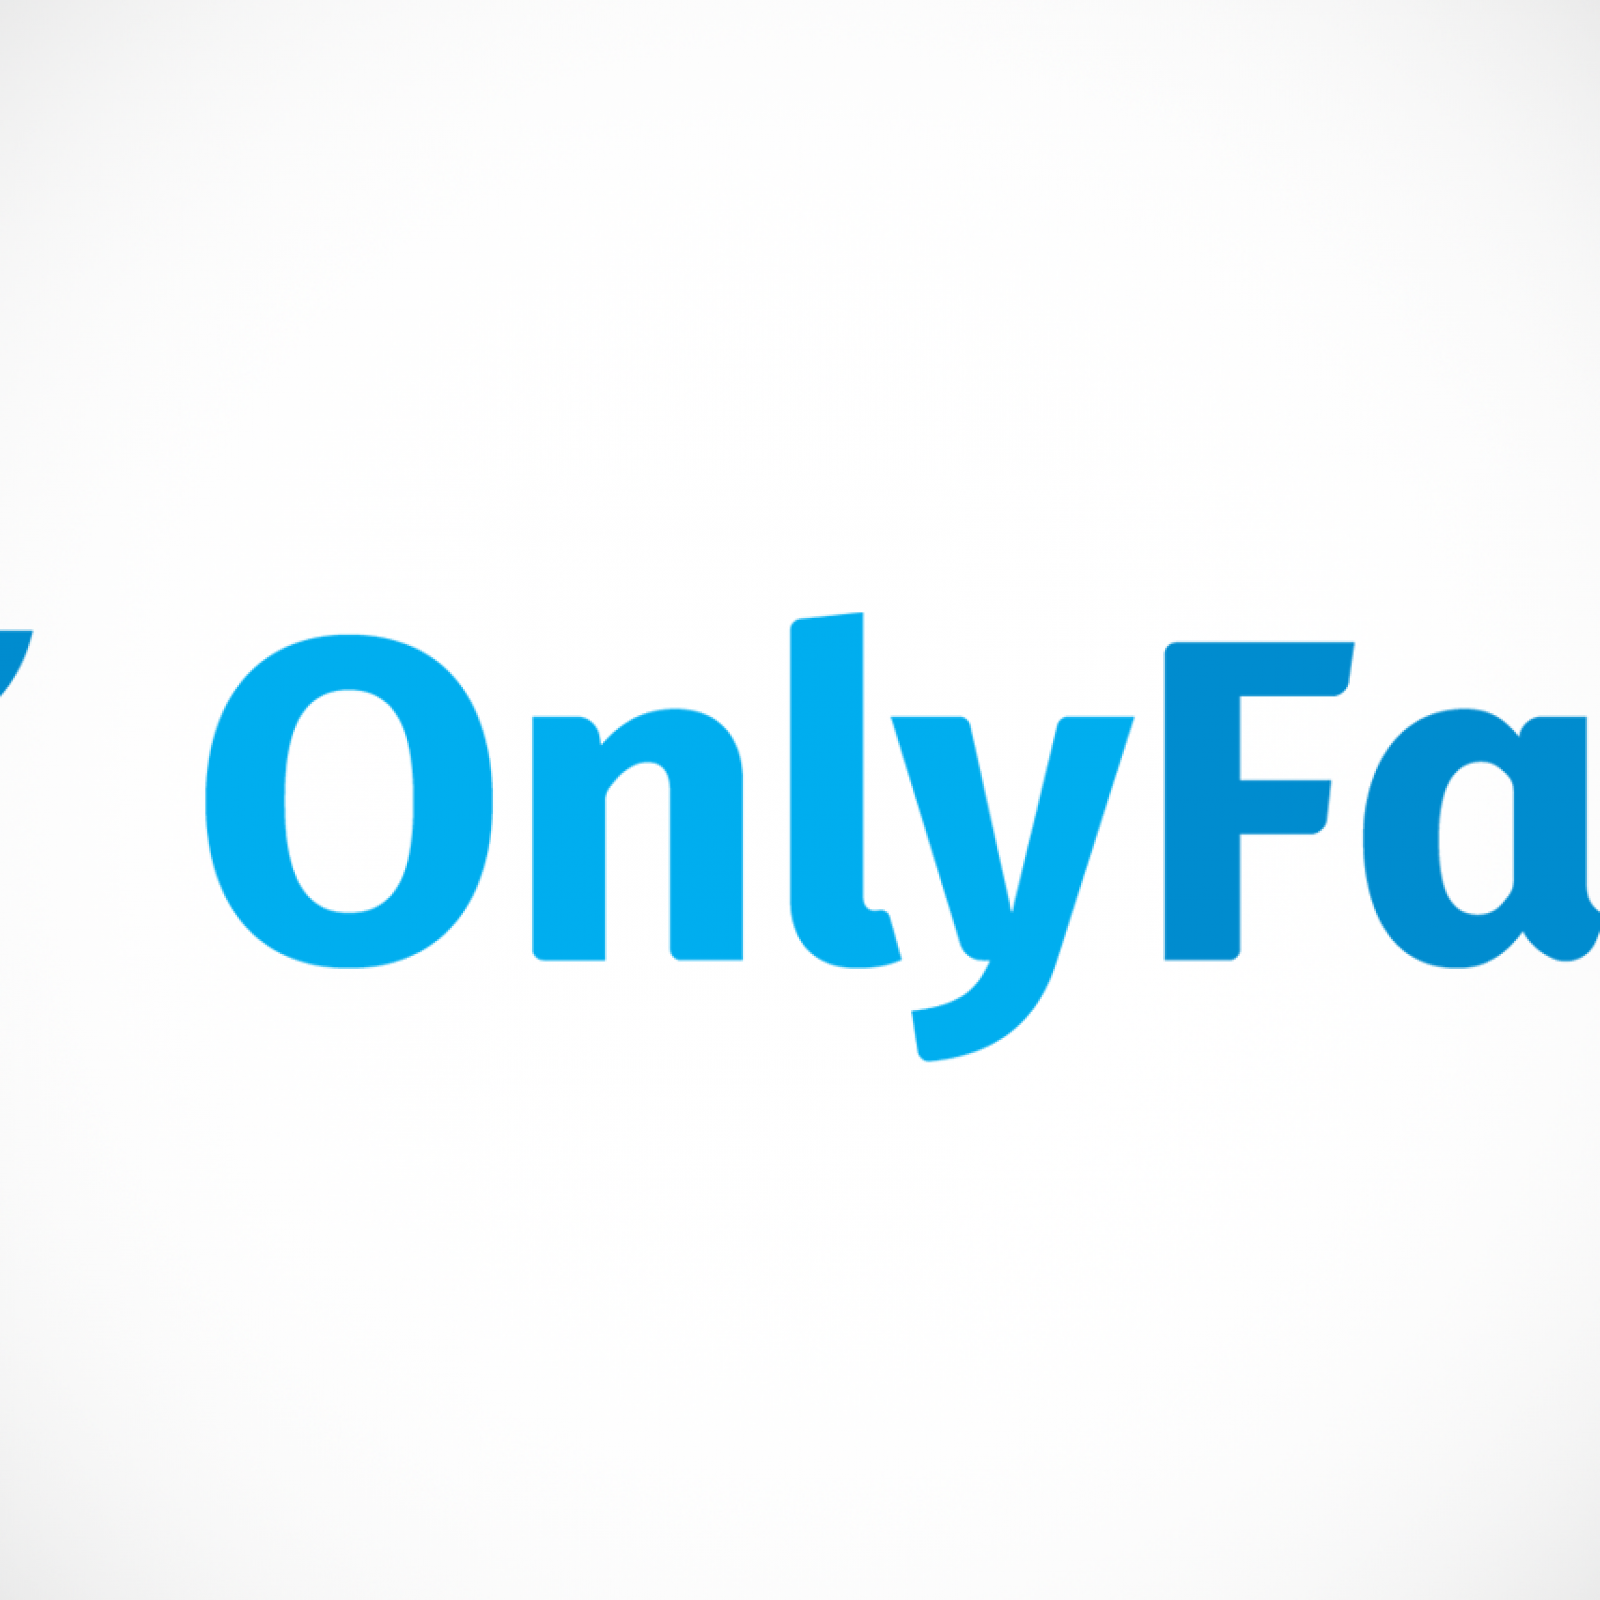 Only fans banner size